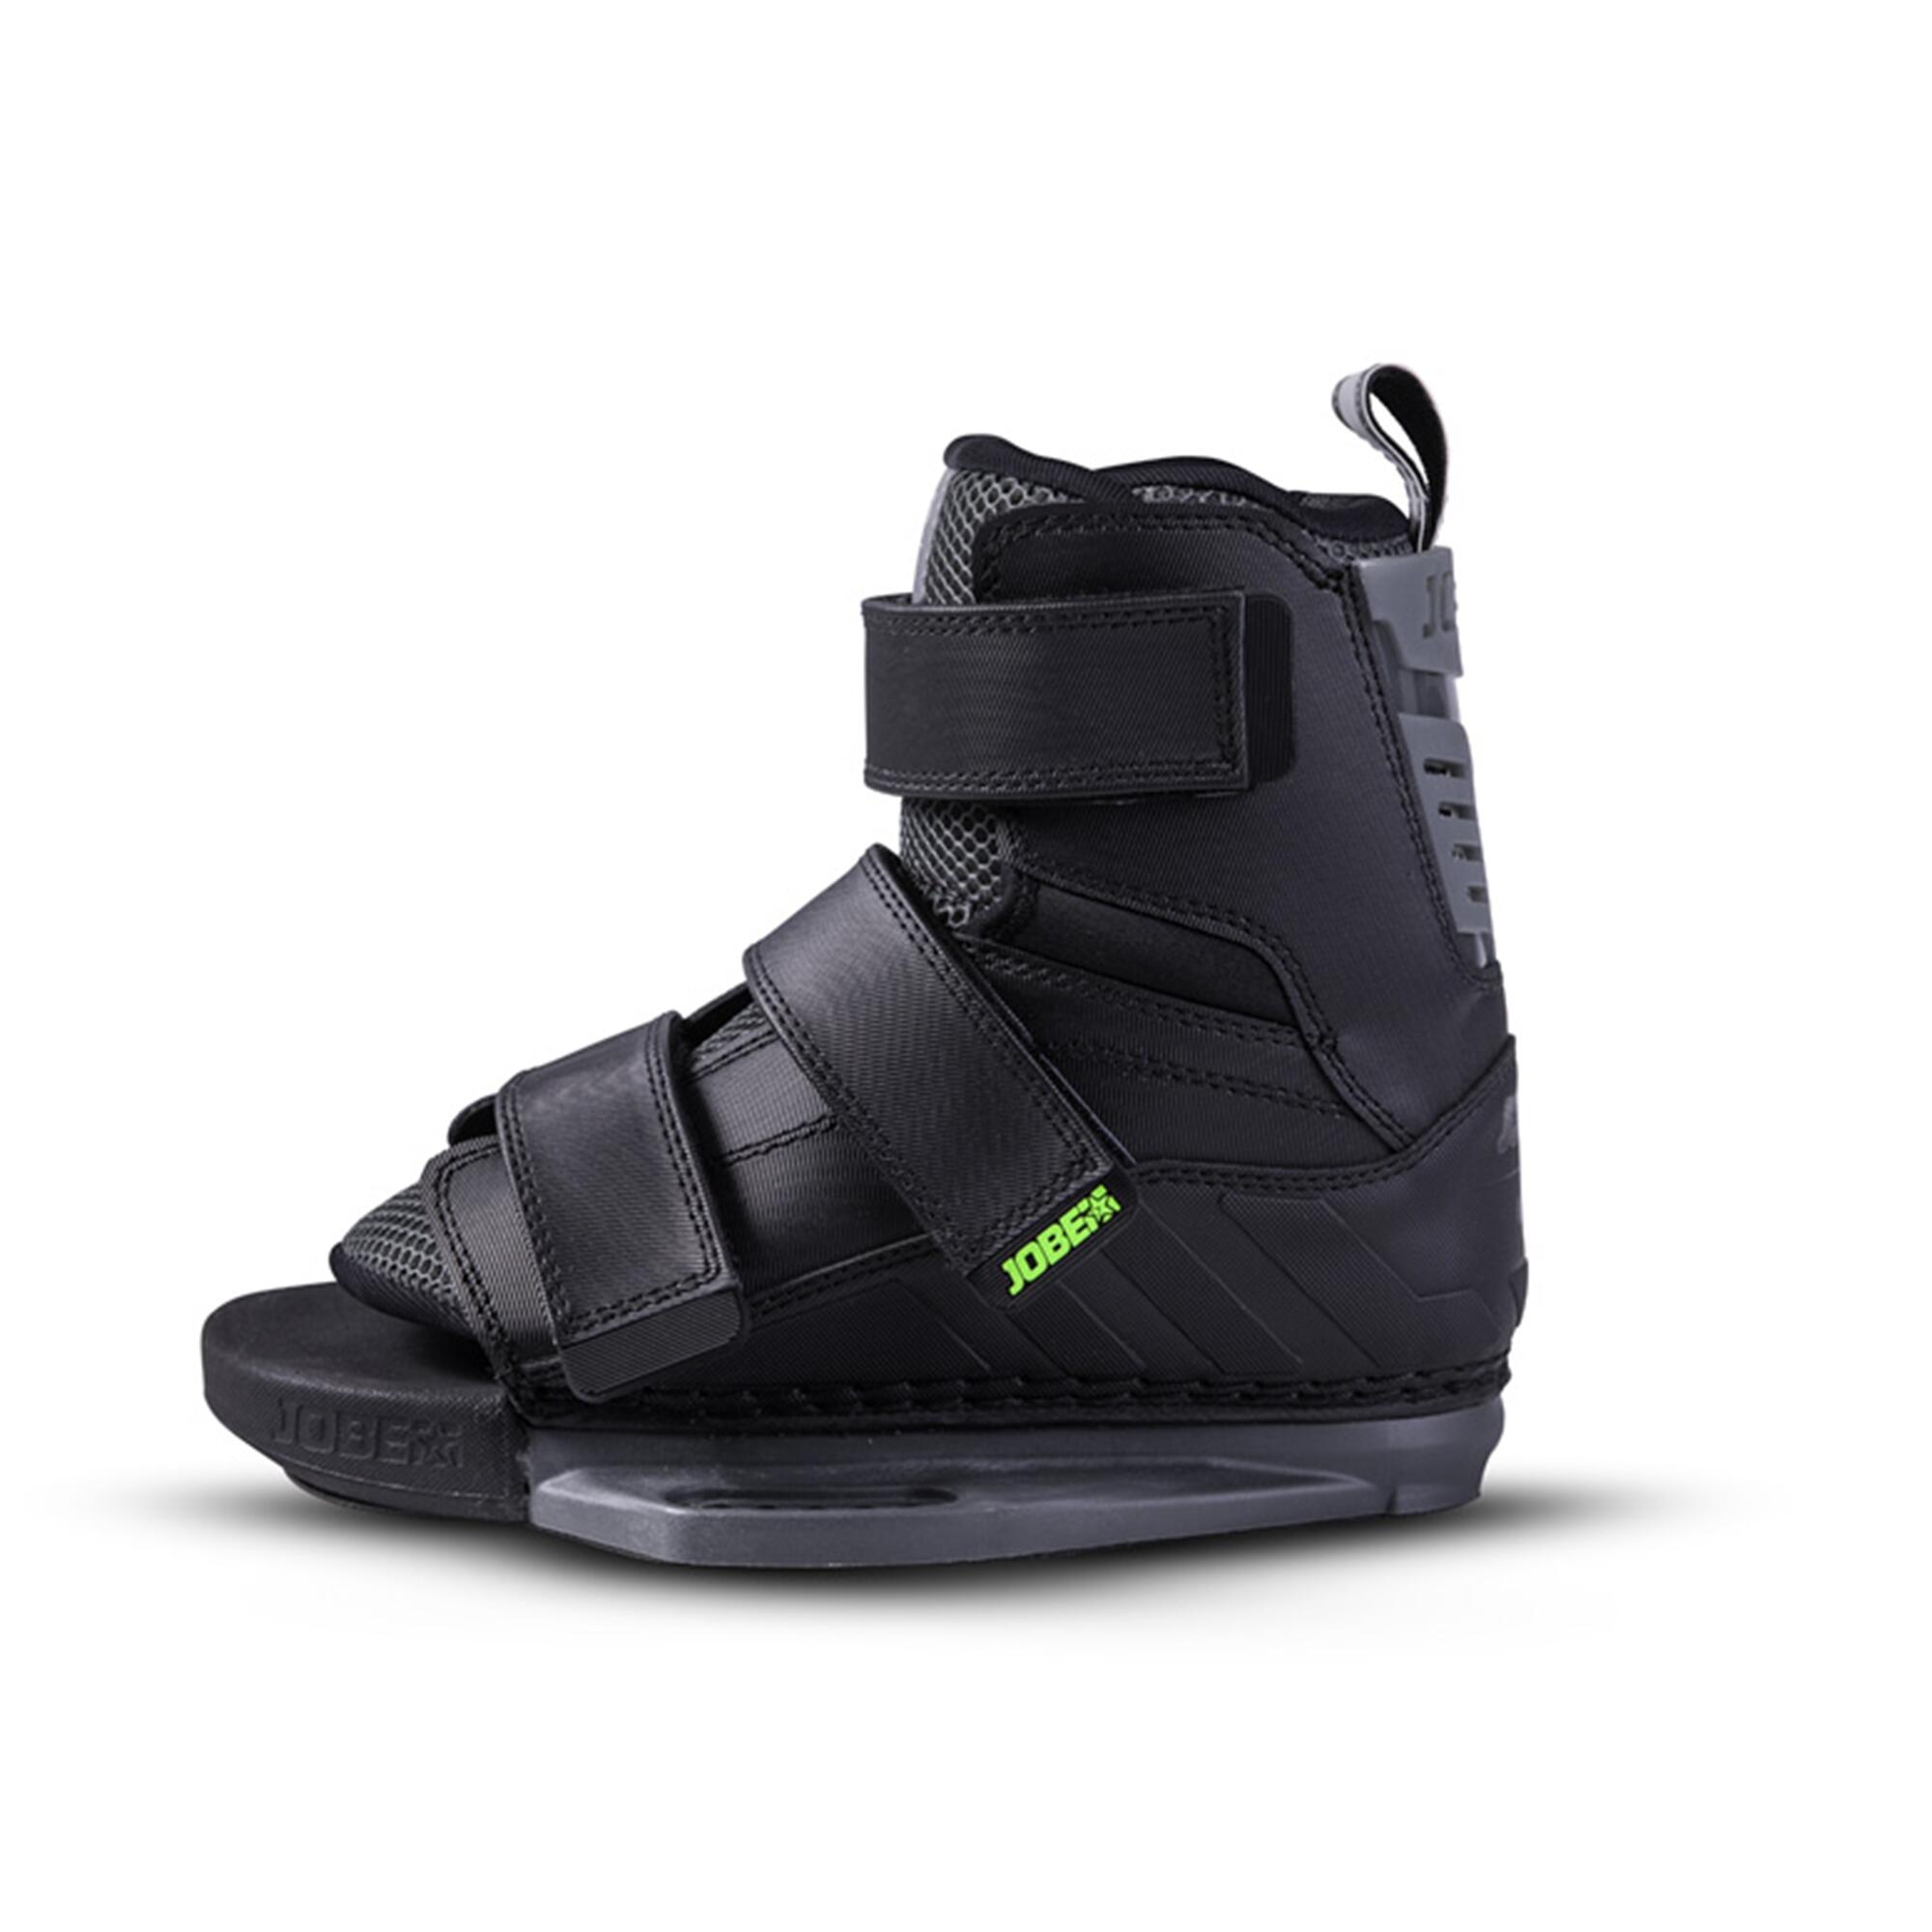 Boots WAKEBOARD boots colac tractat